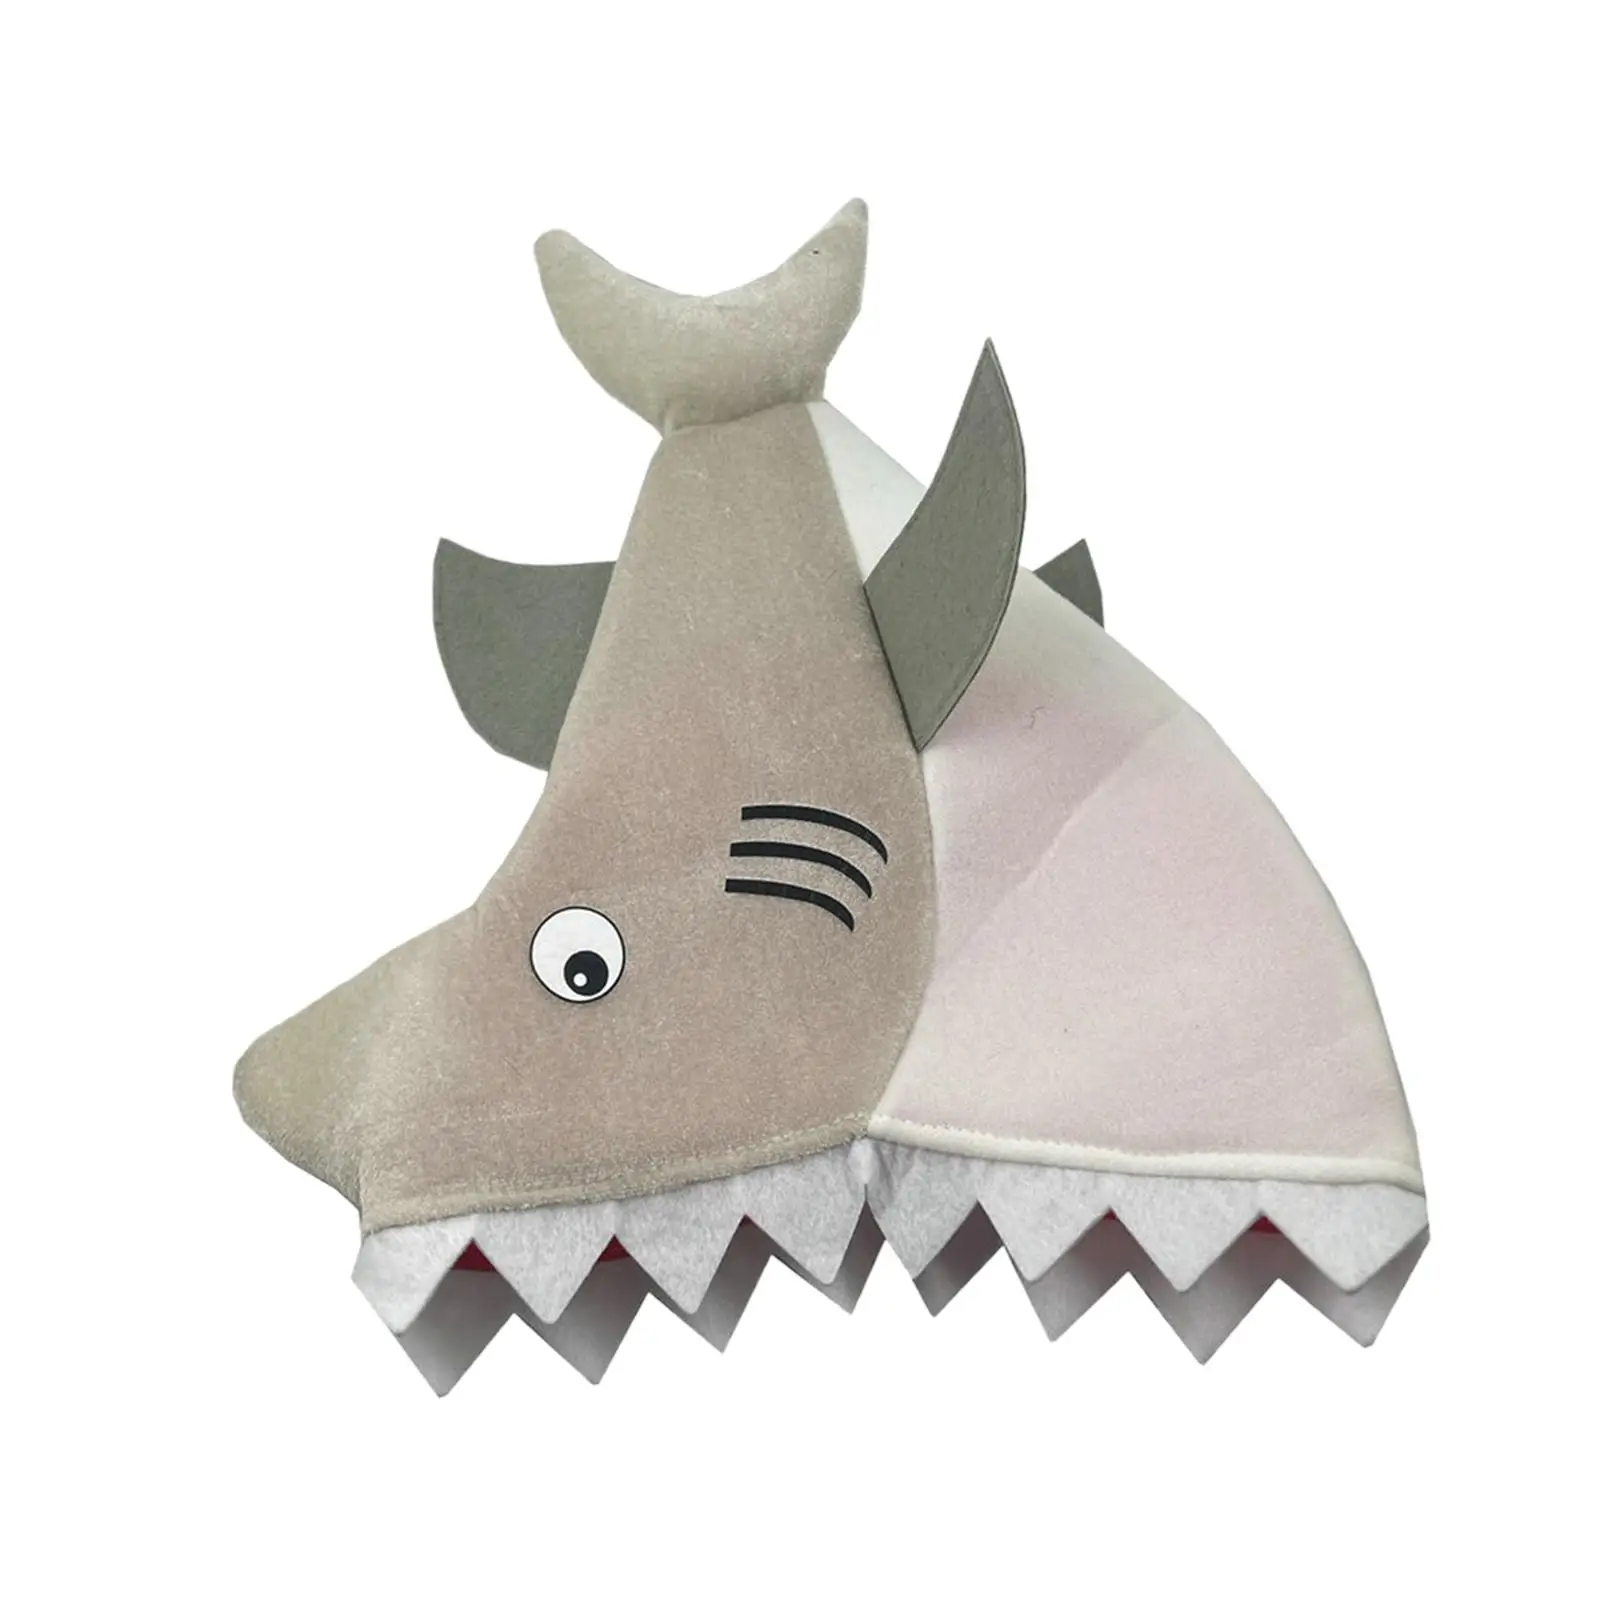 Soft Plush Animal Hat Party Hats Stuffed Toy for Adults Kids Novelty Hats for Birthday Festival Photo Prop Dress up Hat